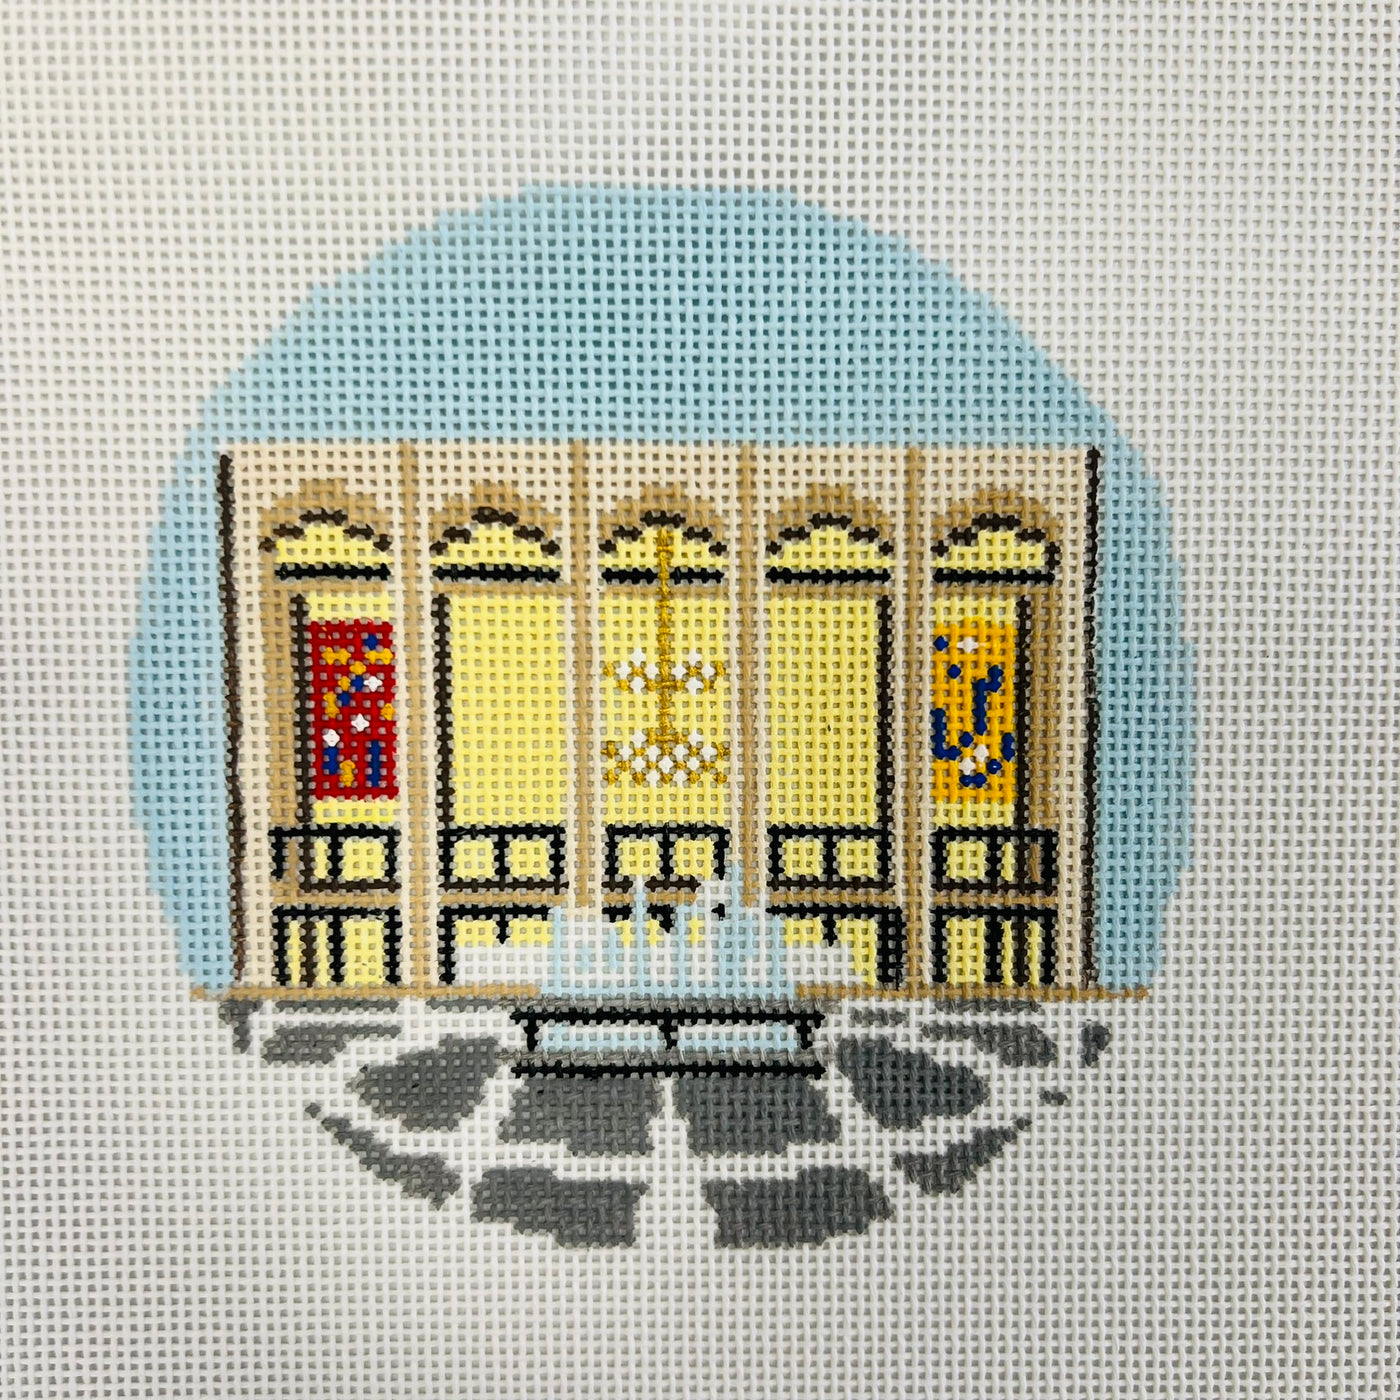 Lincoln Center Ornament with Stitch Guide Needlepoint Canvas